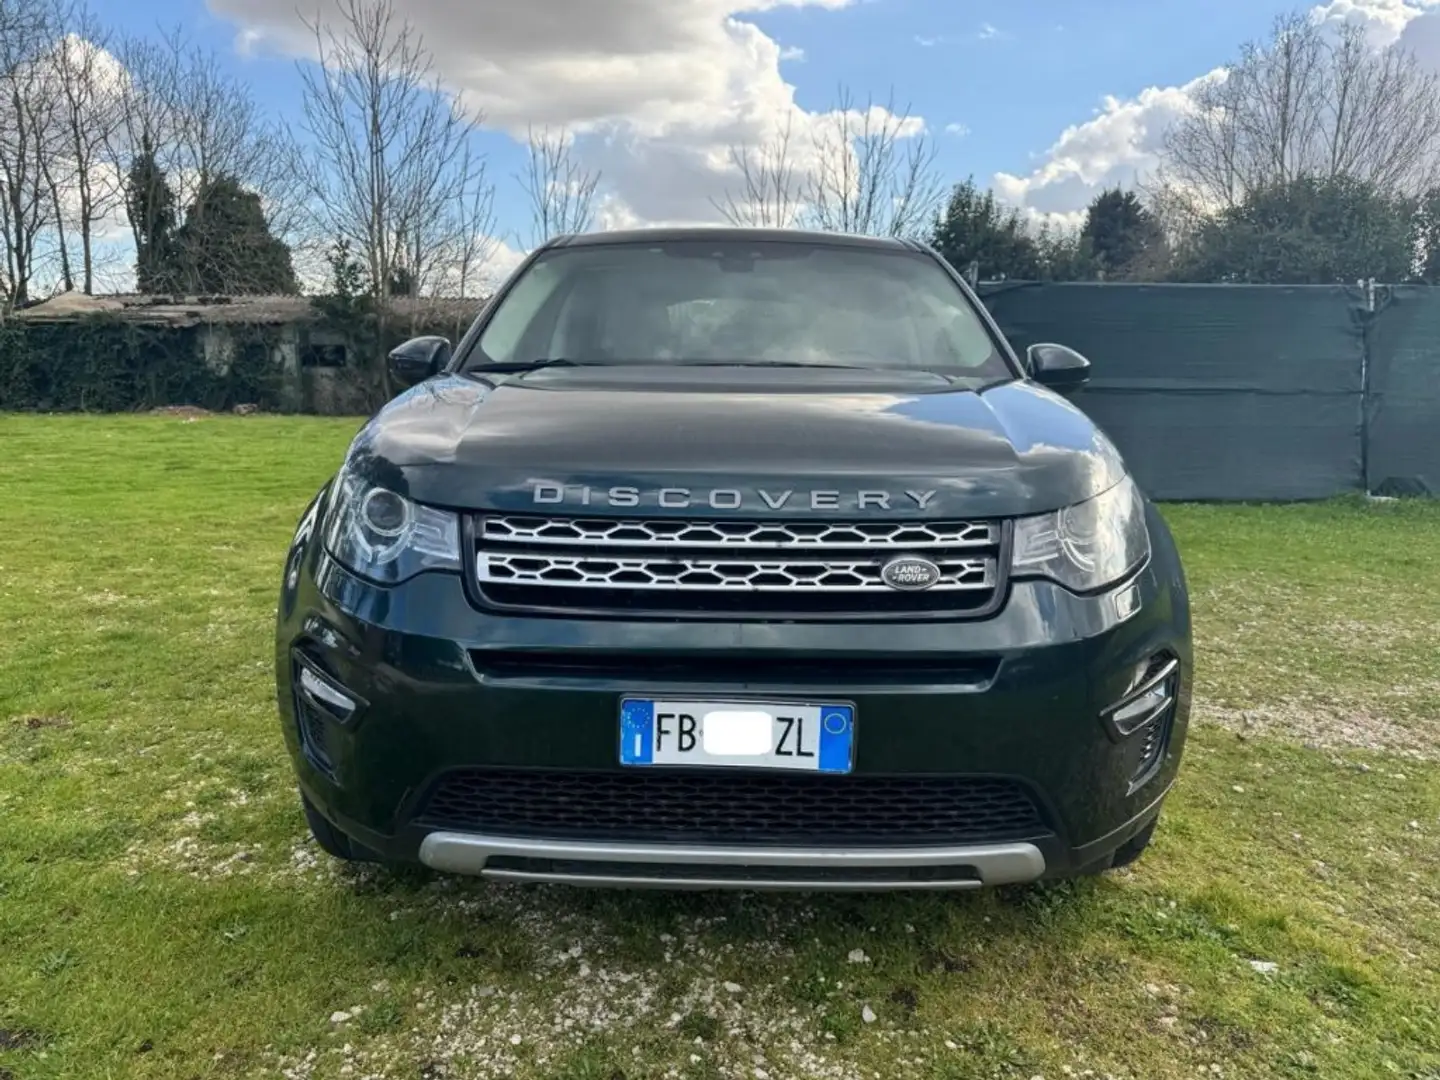 Land Rover Discovery Sport 2.0 TD4 180 CV -MOTORE ROTTO- HSE Luxury Verde - 2